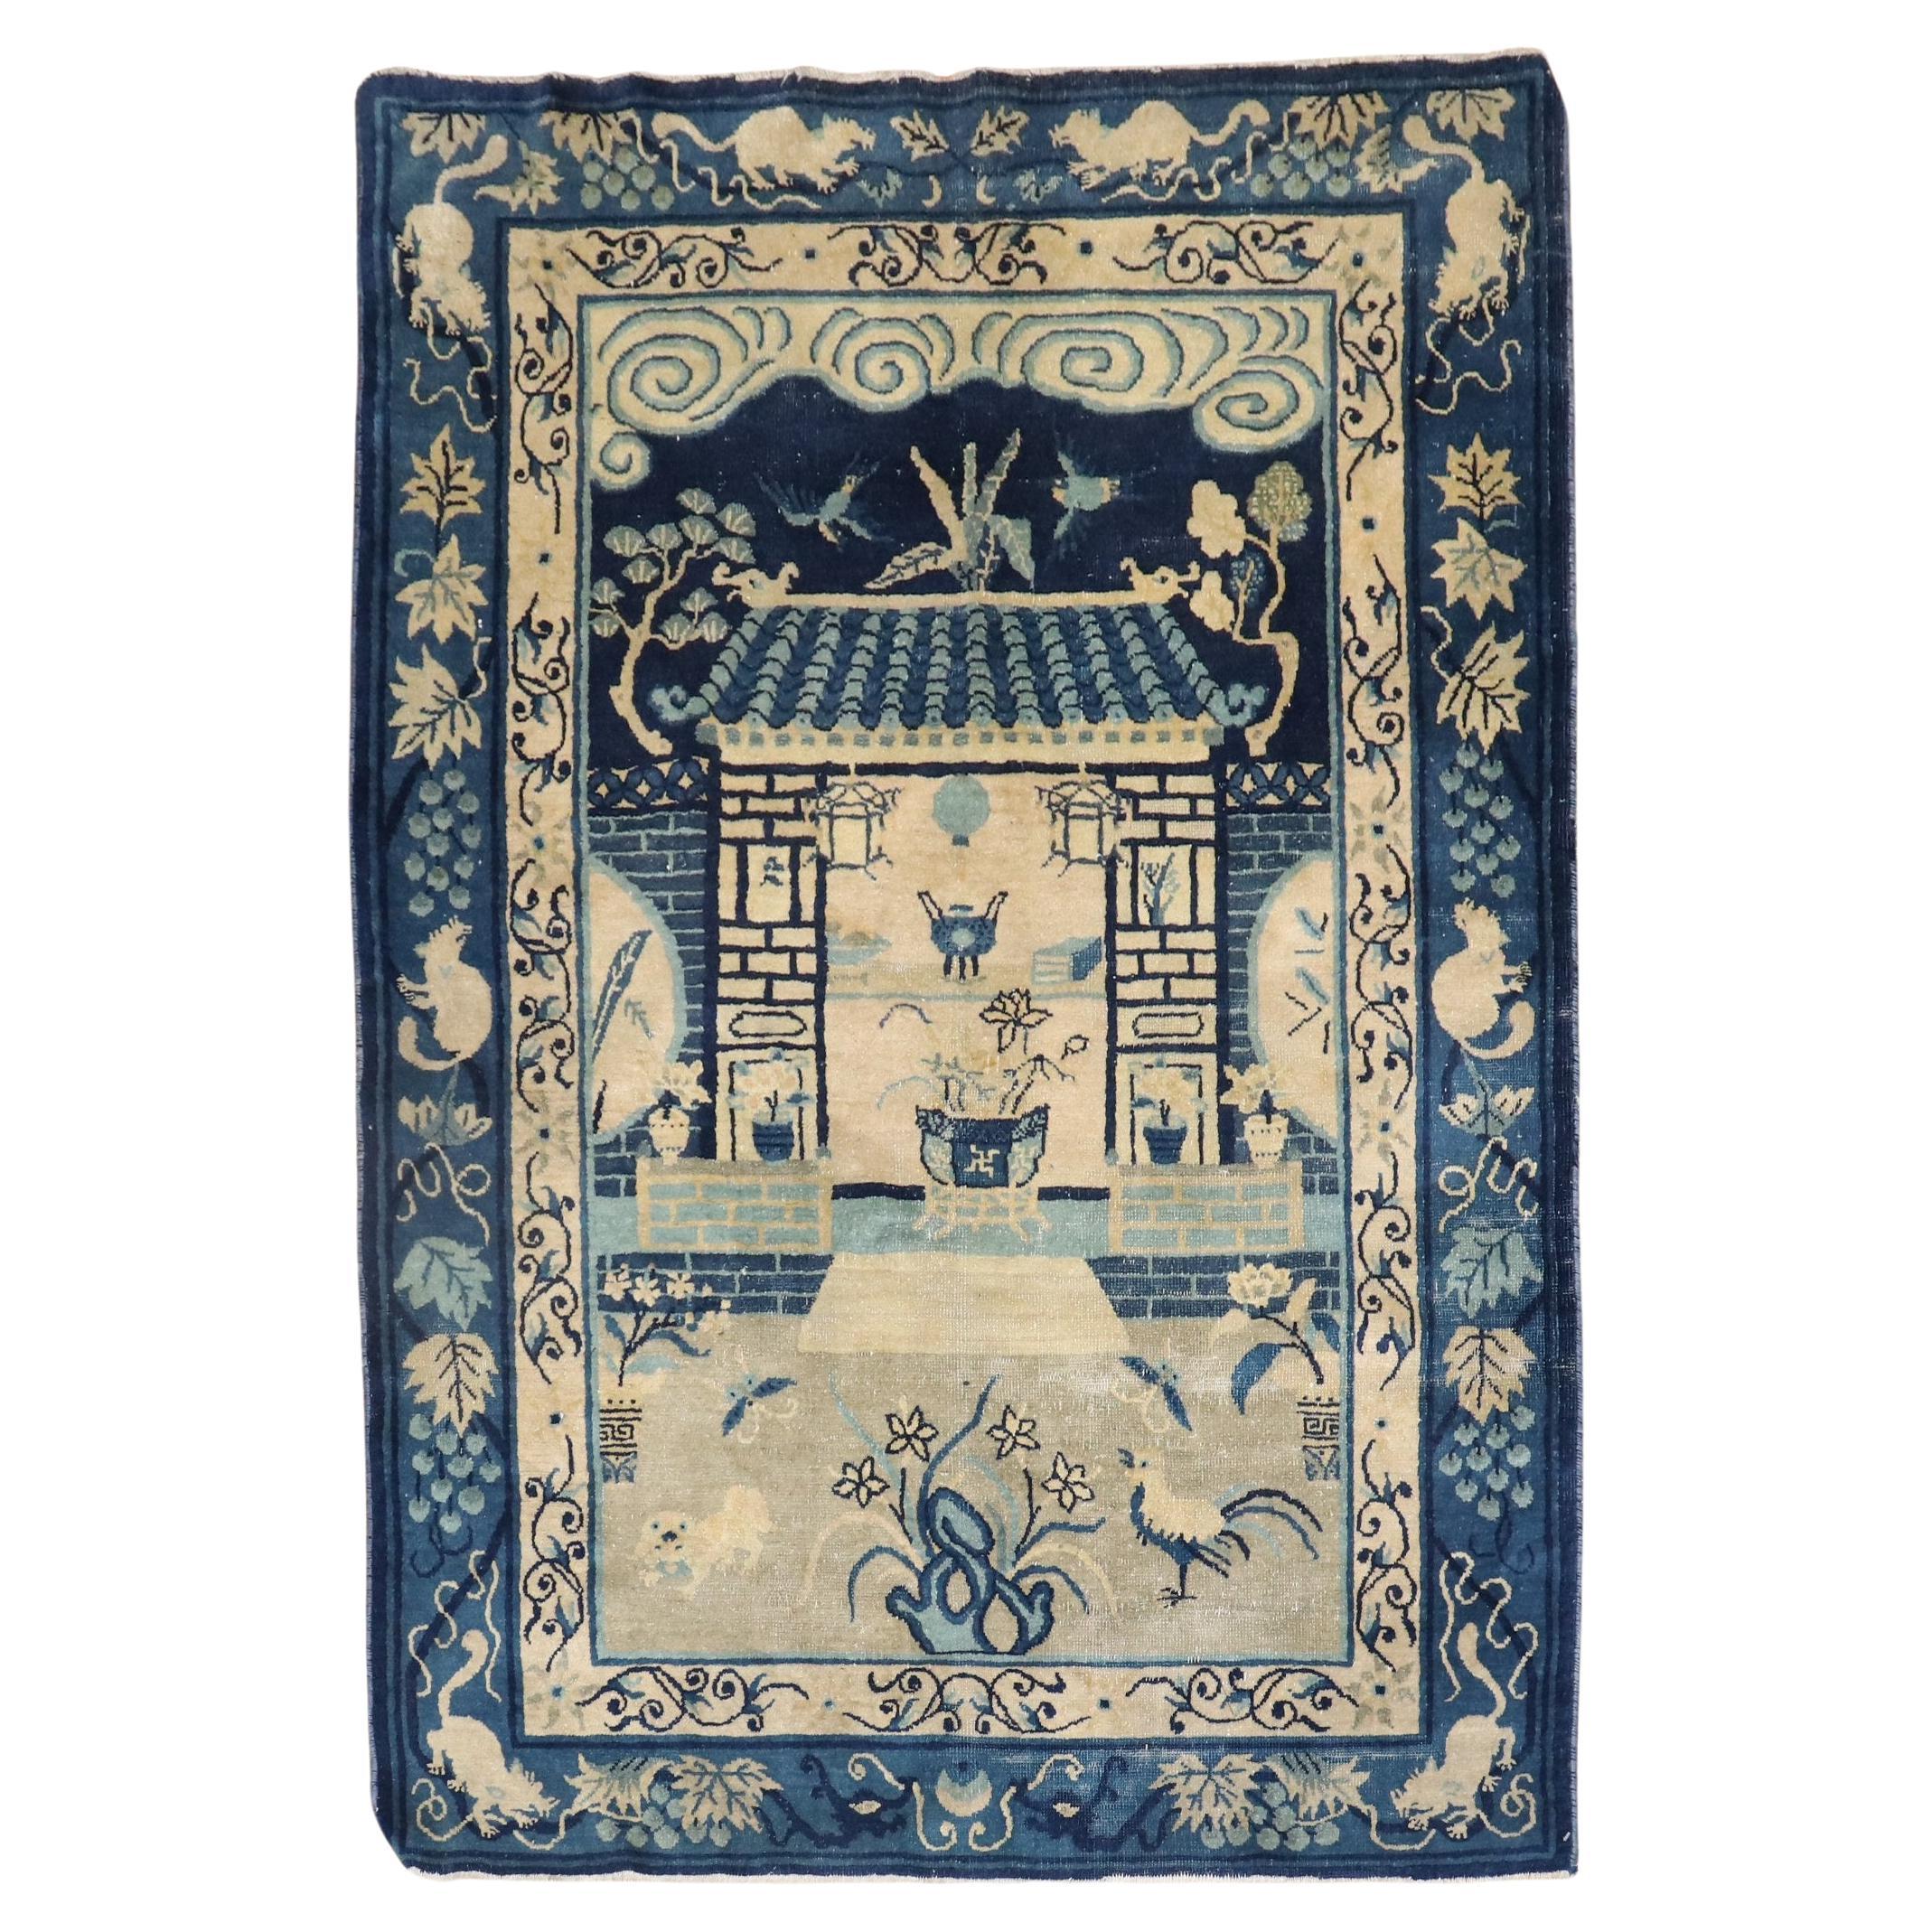 Zabihi Collection Tan Blue Color Early 20th Century Antique Chinese Oriental Rug